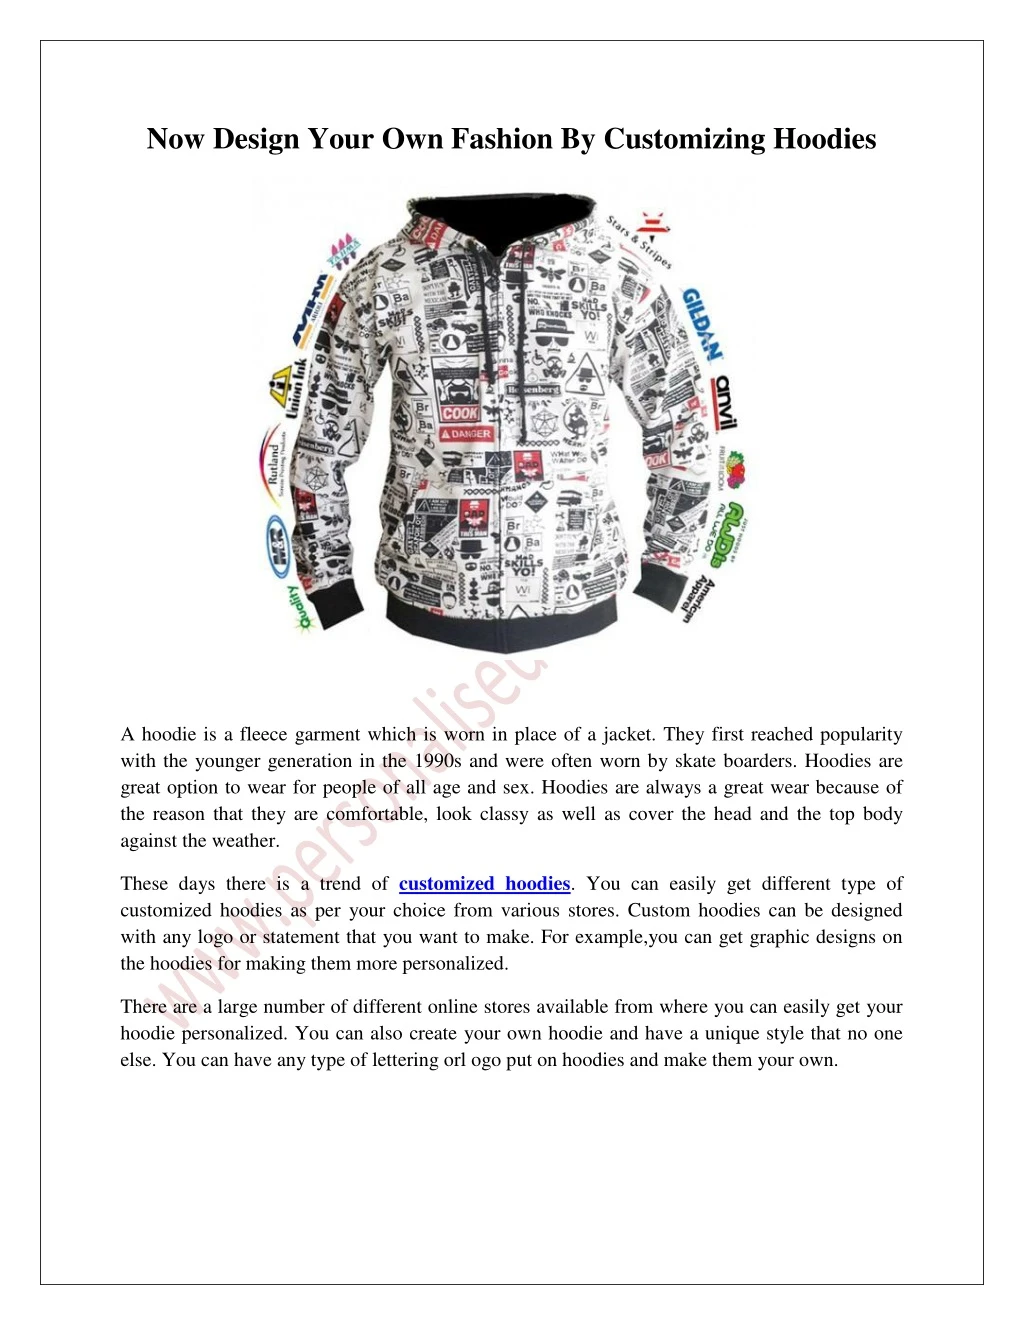 now design your own fashion by customizing hoodies